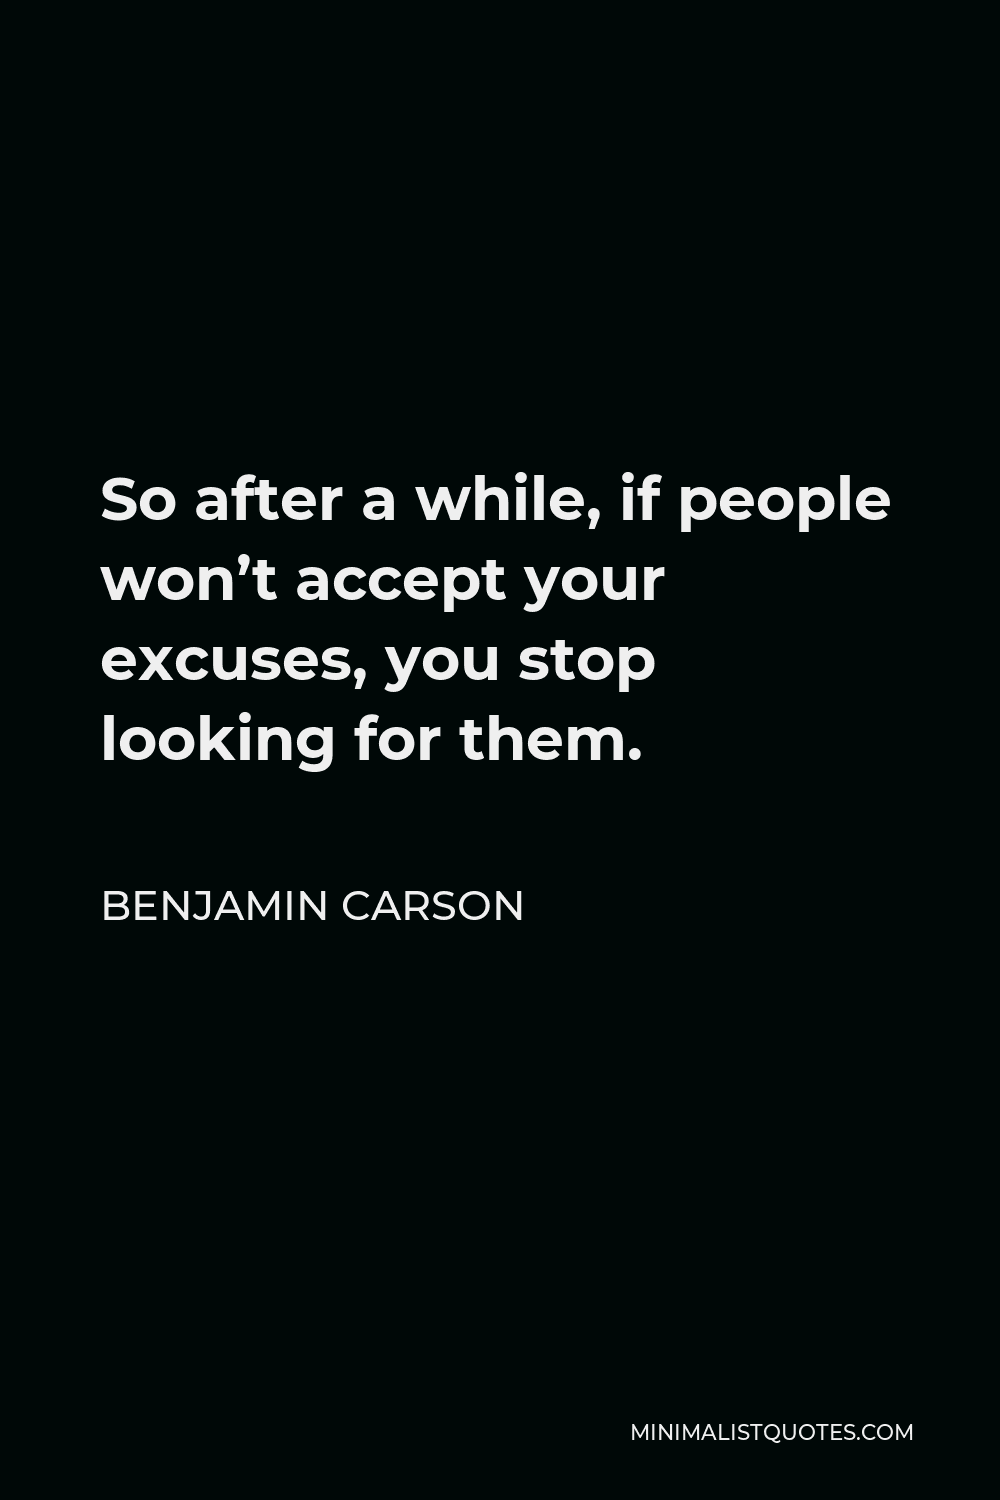 Benjamin Carson Quote - So after a while, if people won’t accept your excuses, you stop looking for them.